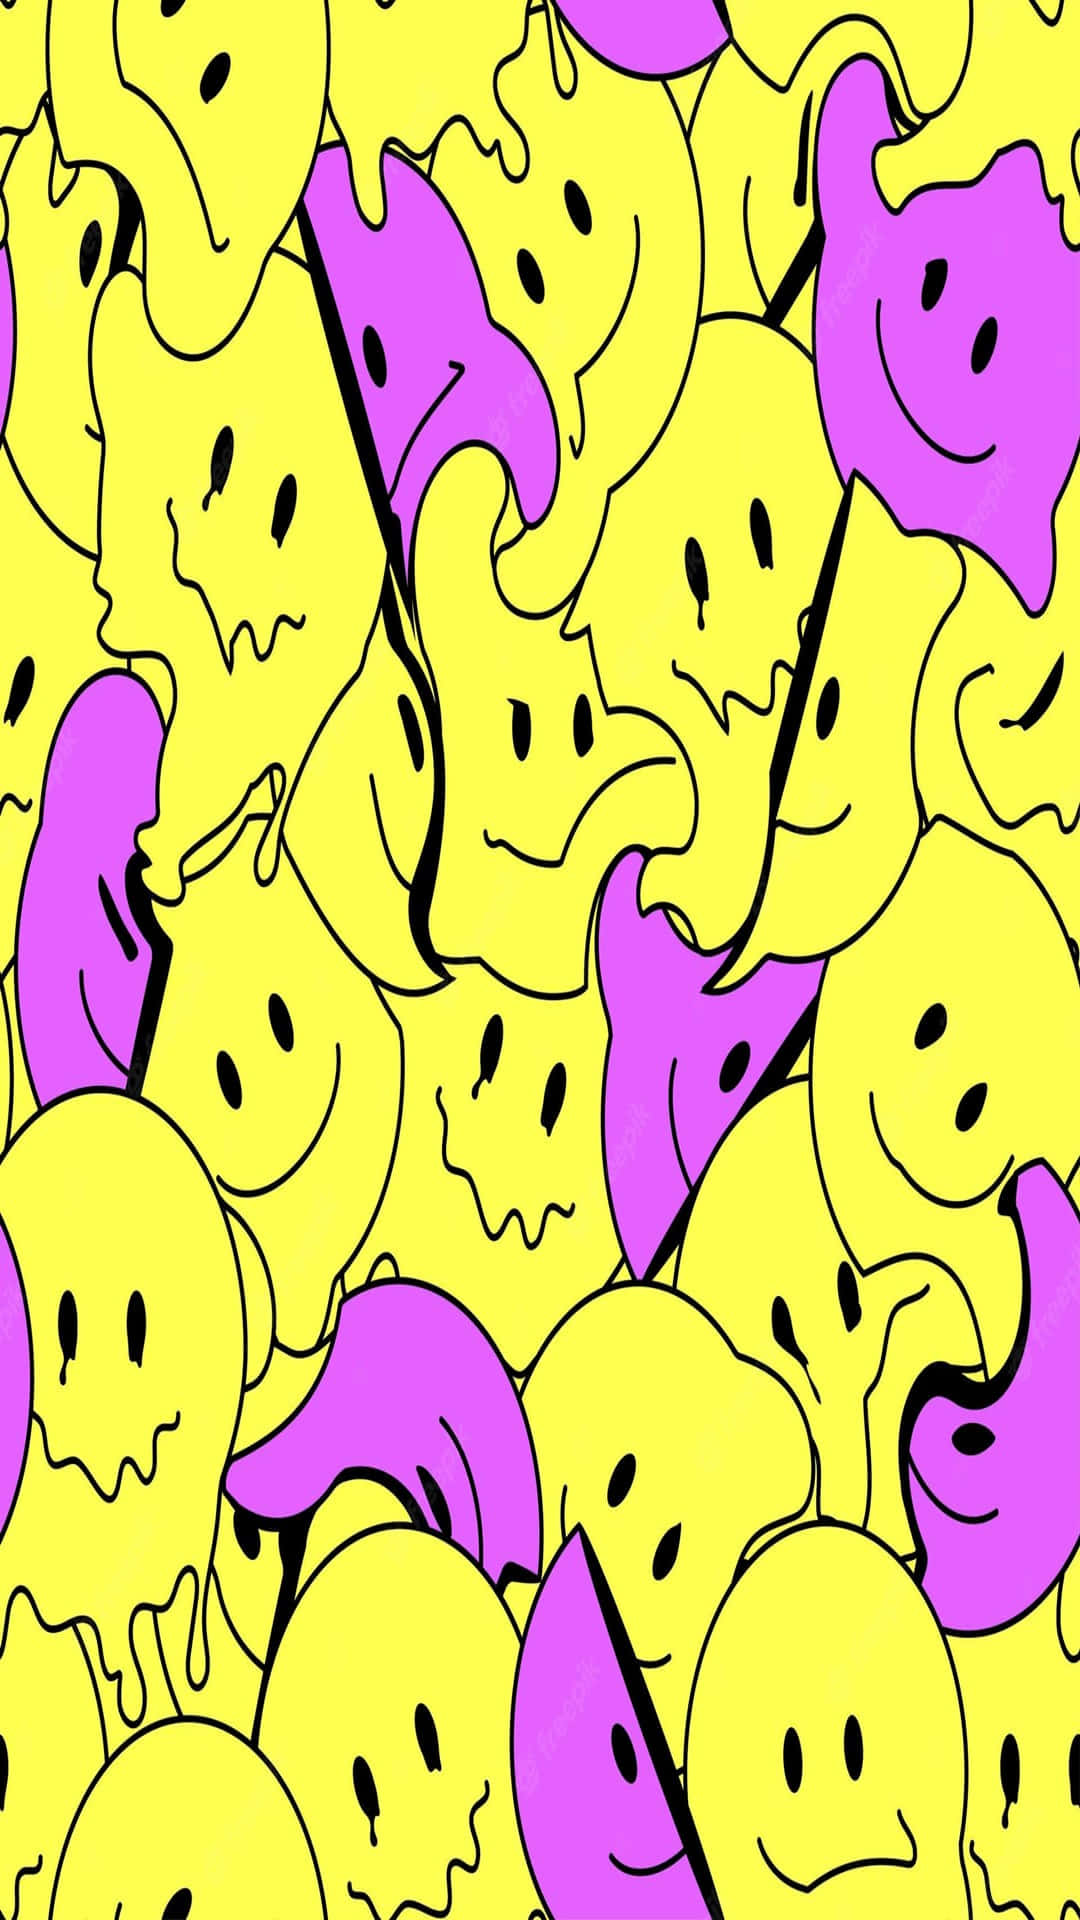 Psychedelic_ Smiley_ Faces_ Pattern Wallpaper